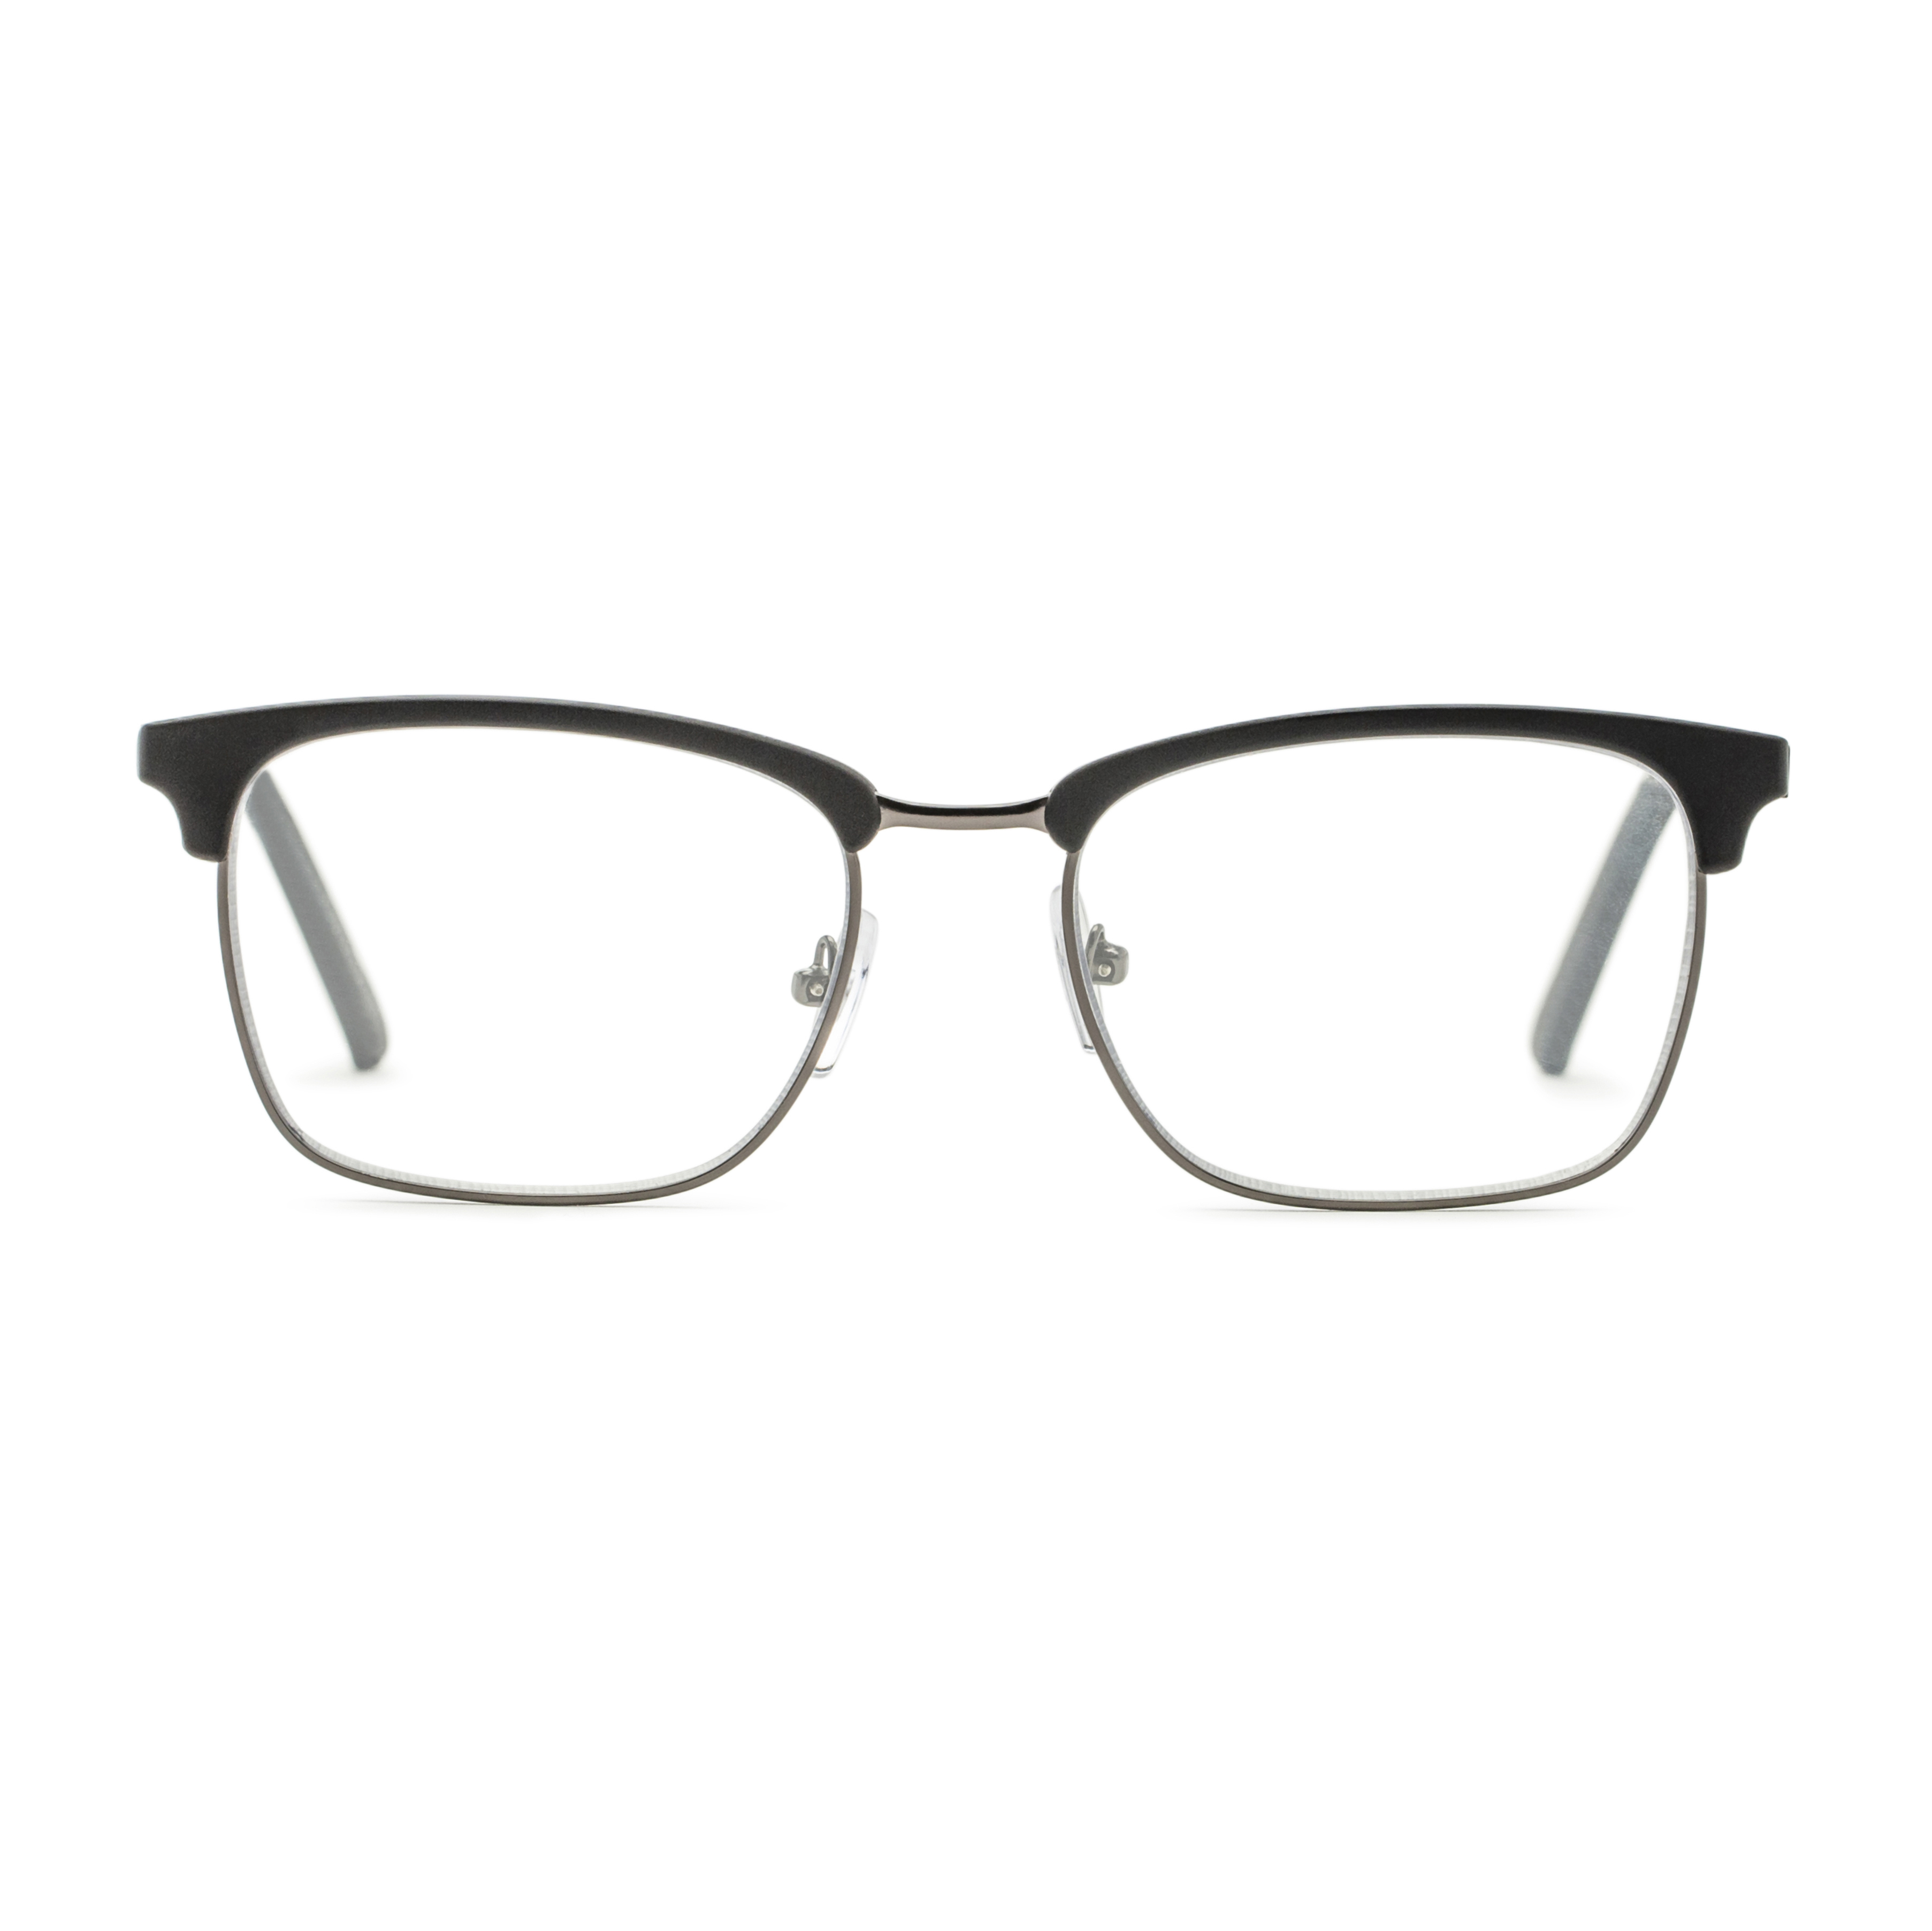 Men's Club Reading Glasses In Black By Foster Grant - Perkins Pop Of Power® Bifocal Style Readers - +2.00